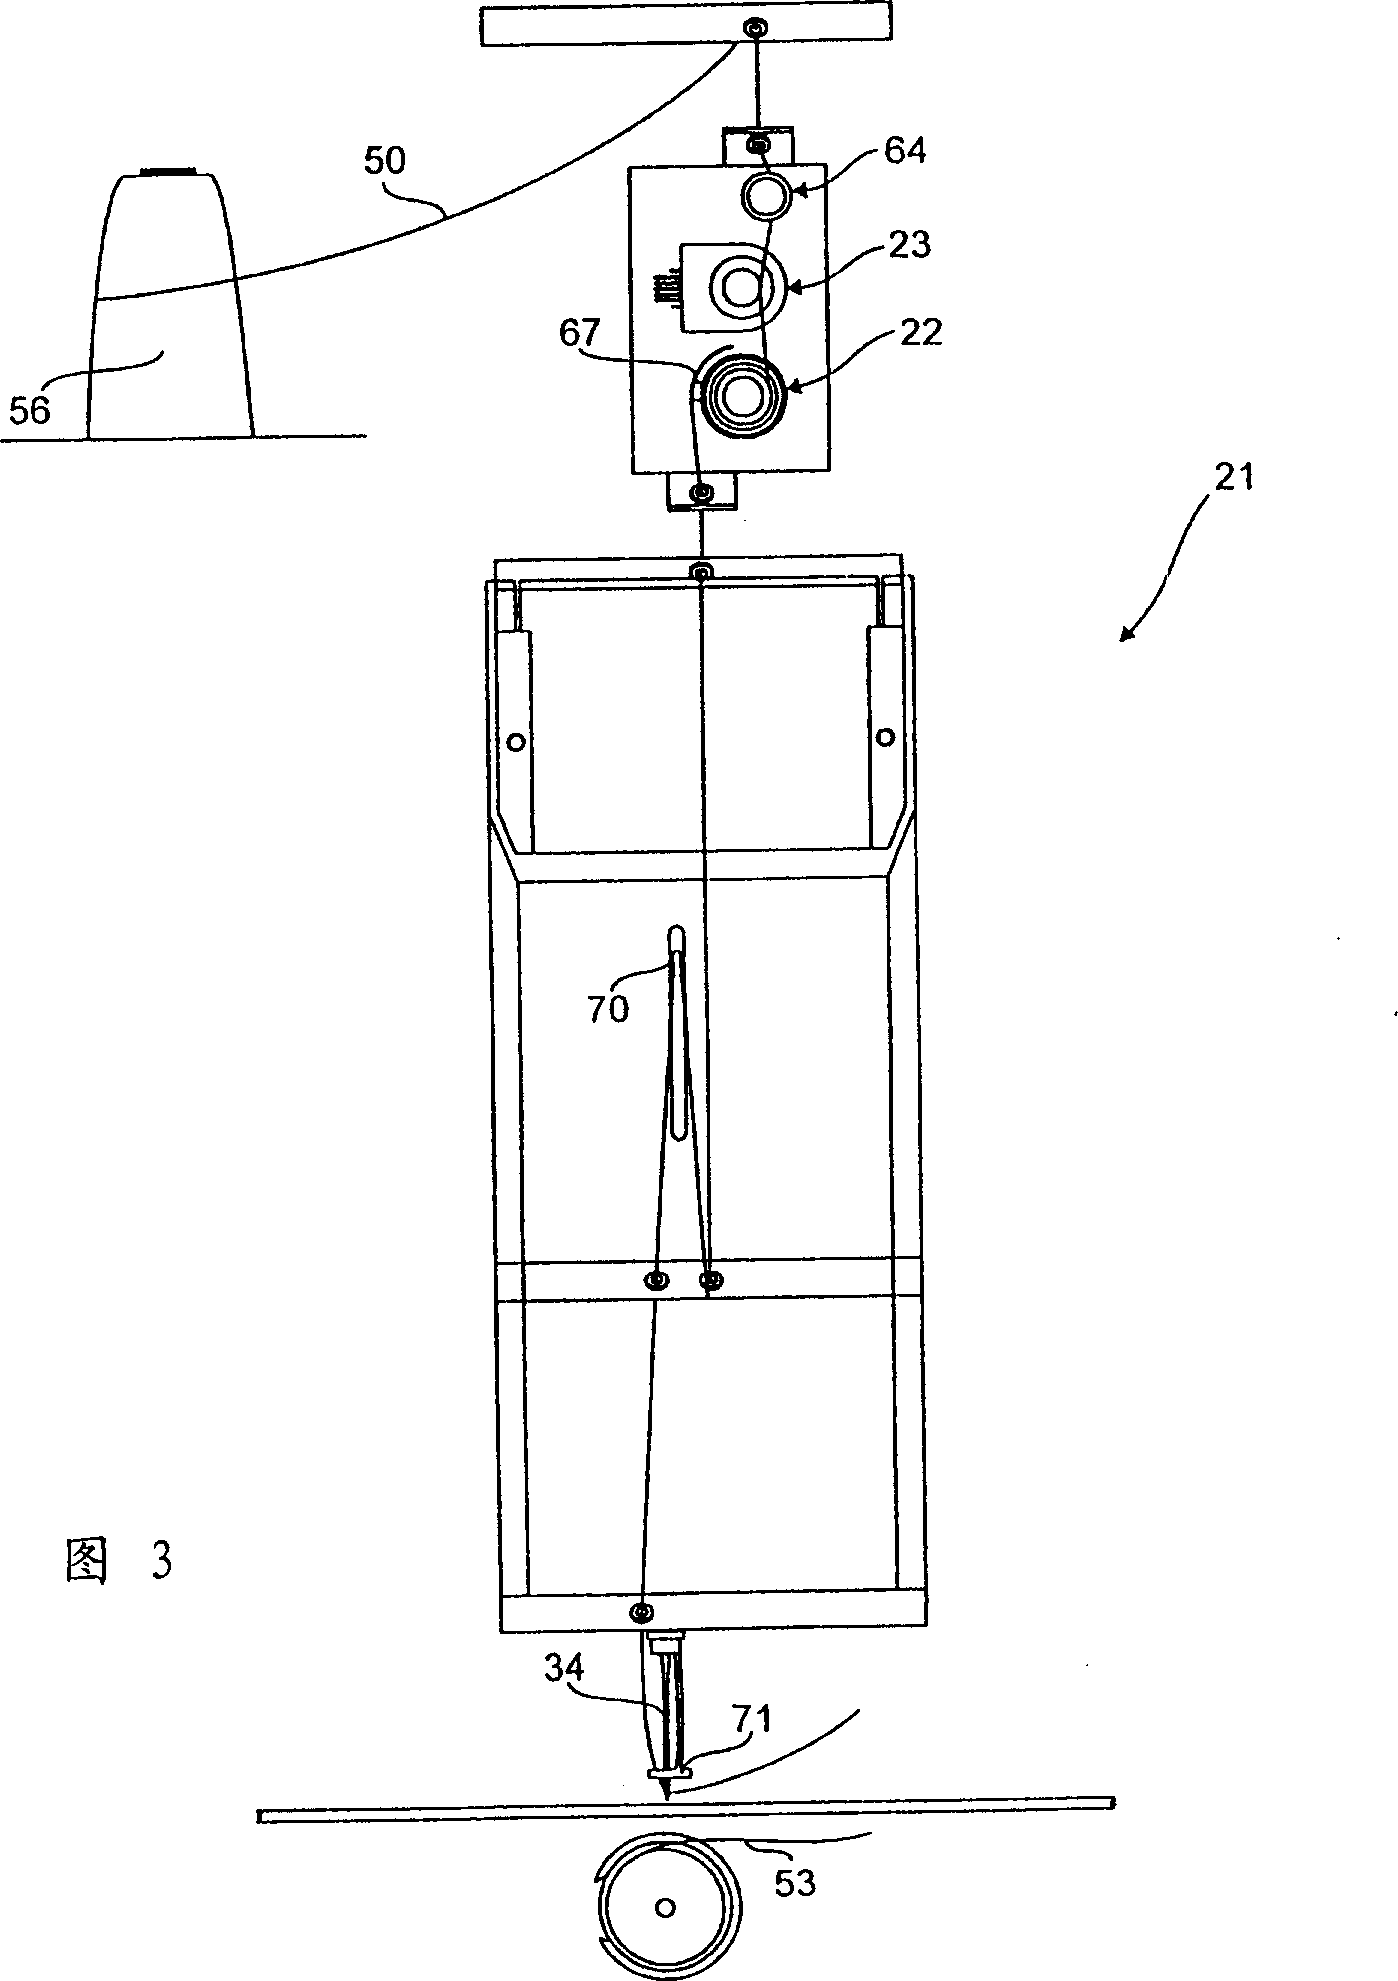 Method and apparatus for automatic adjustment of thread tension